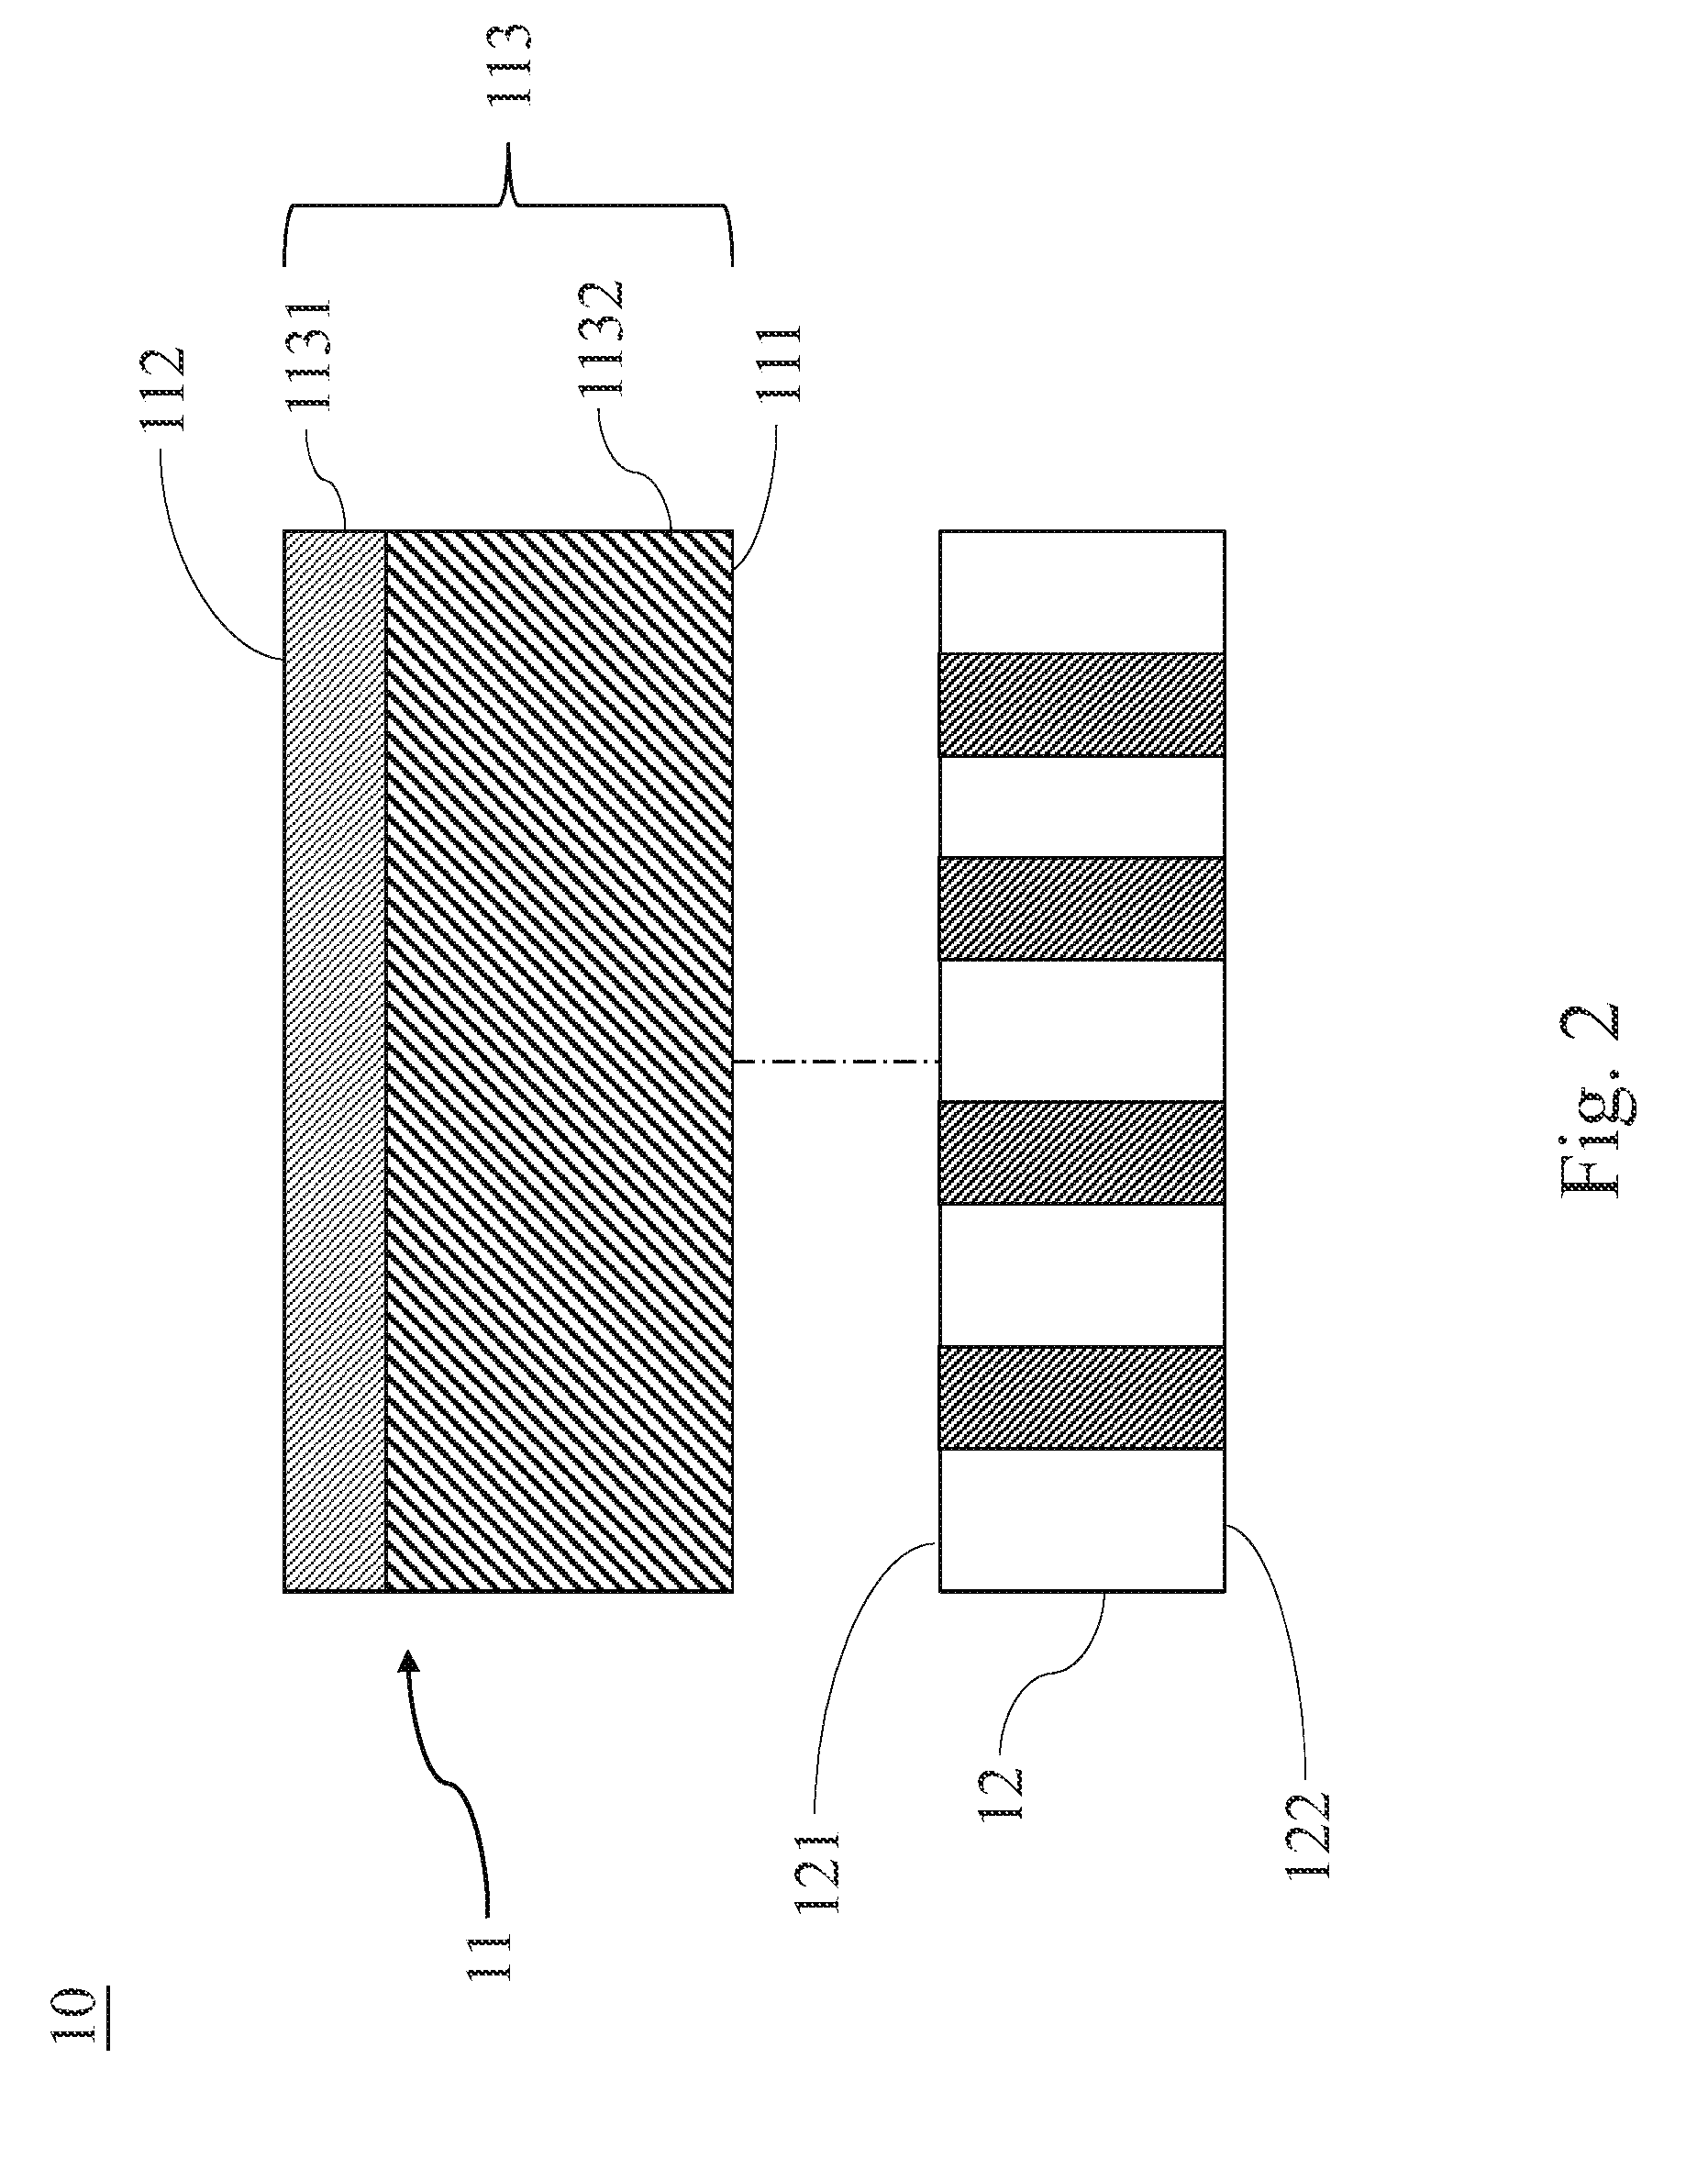 Water-proof and dust-proof membrane assembly and applications thereof